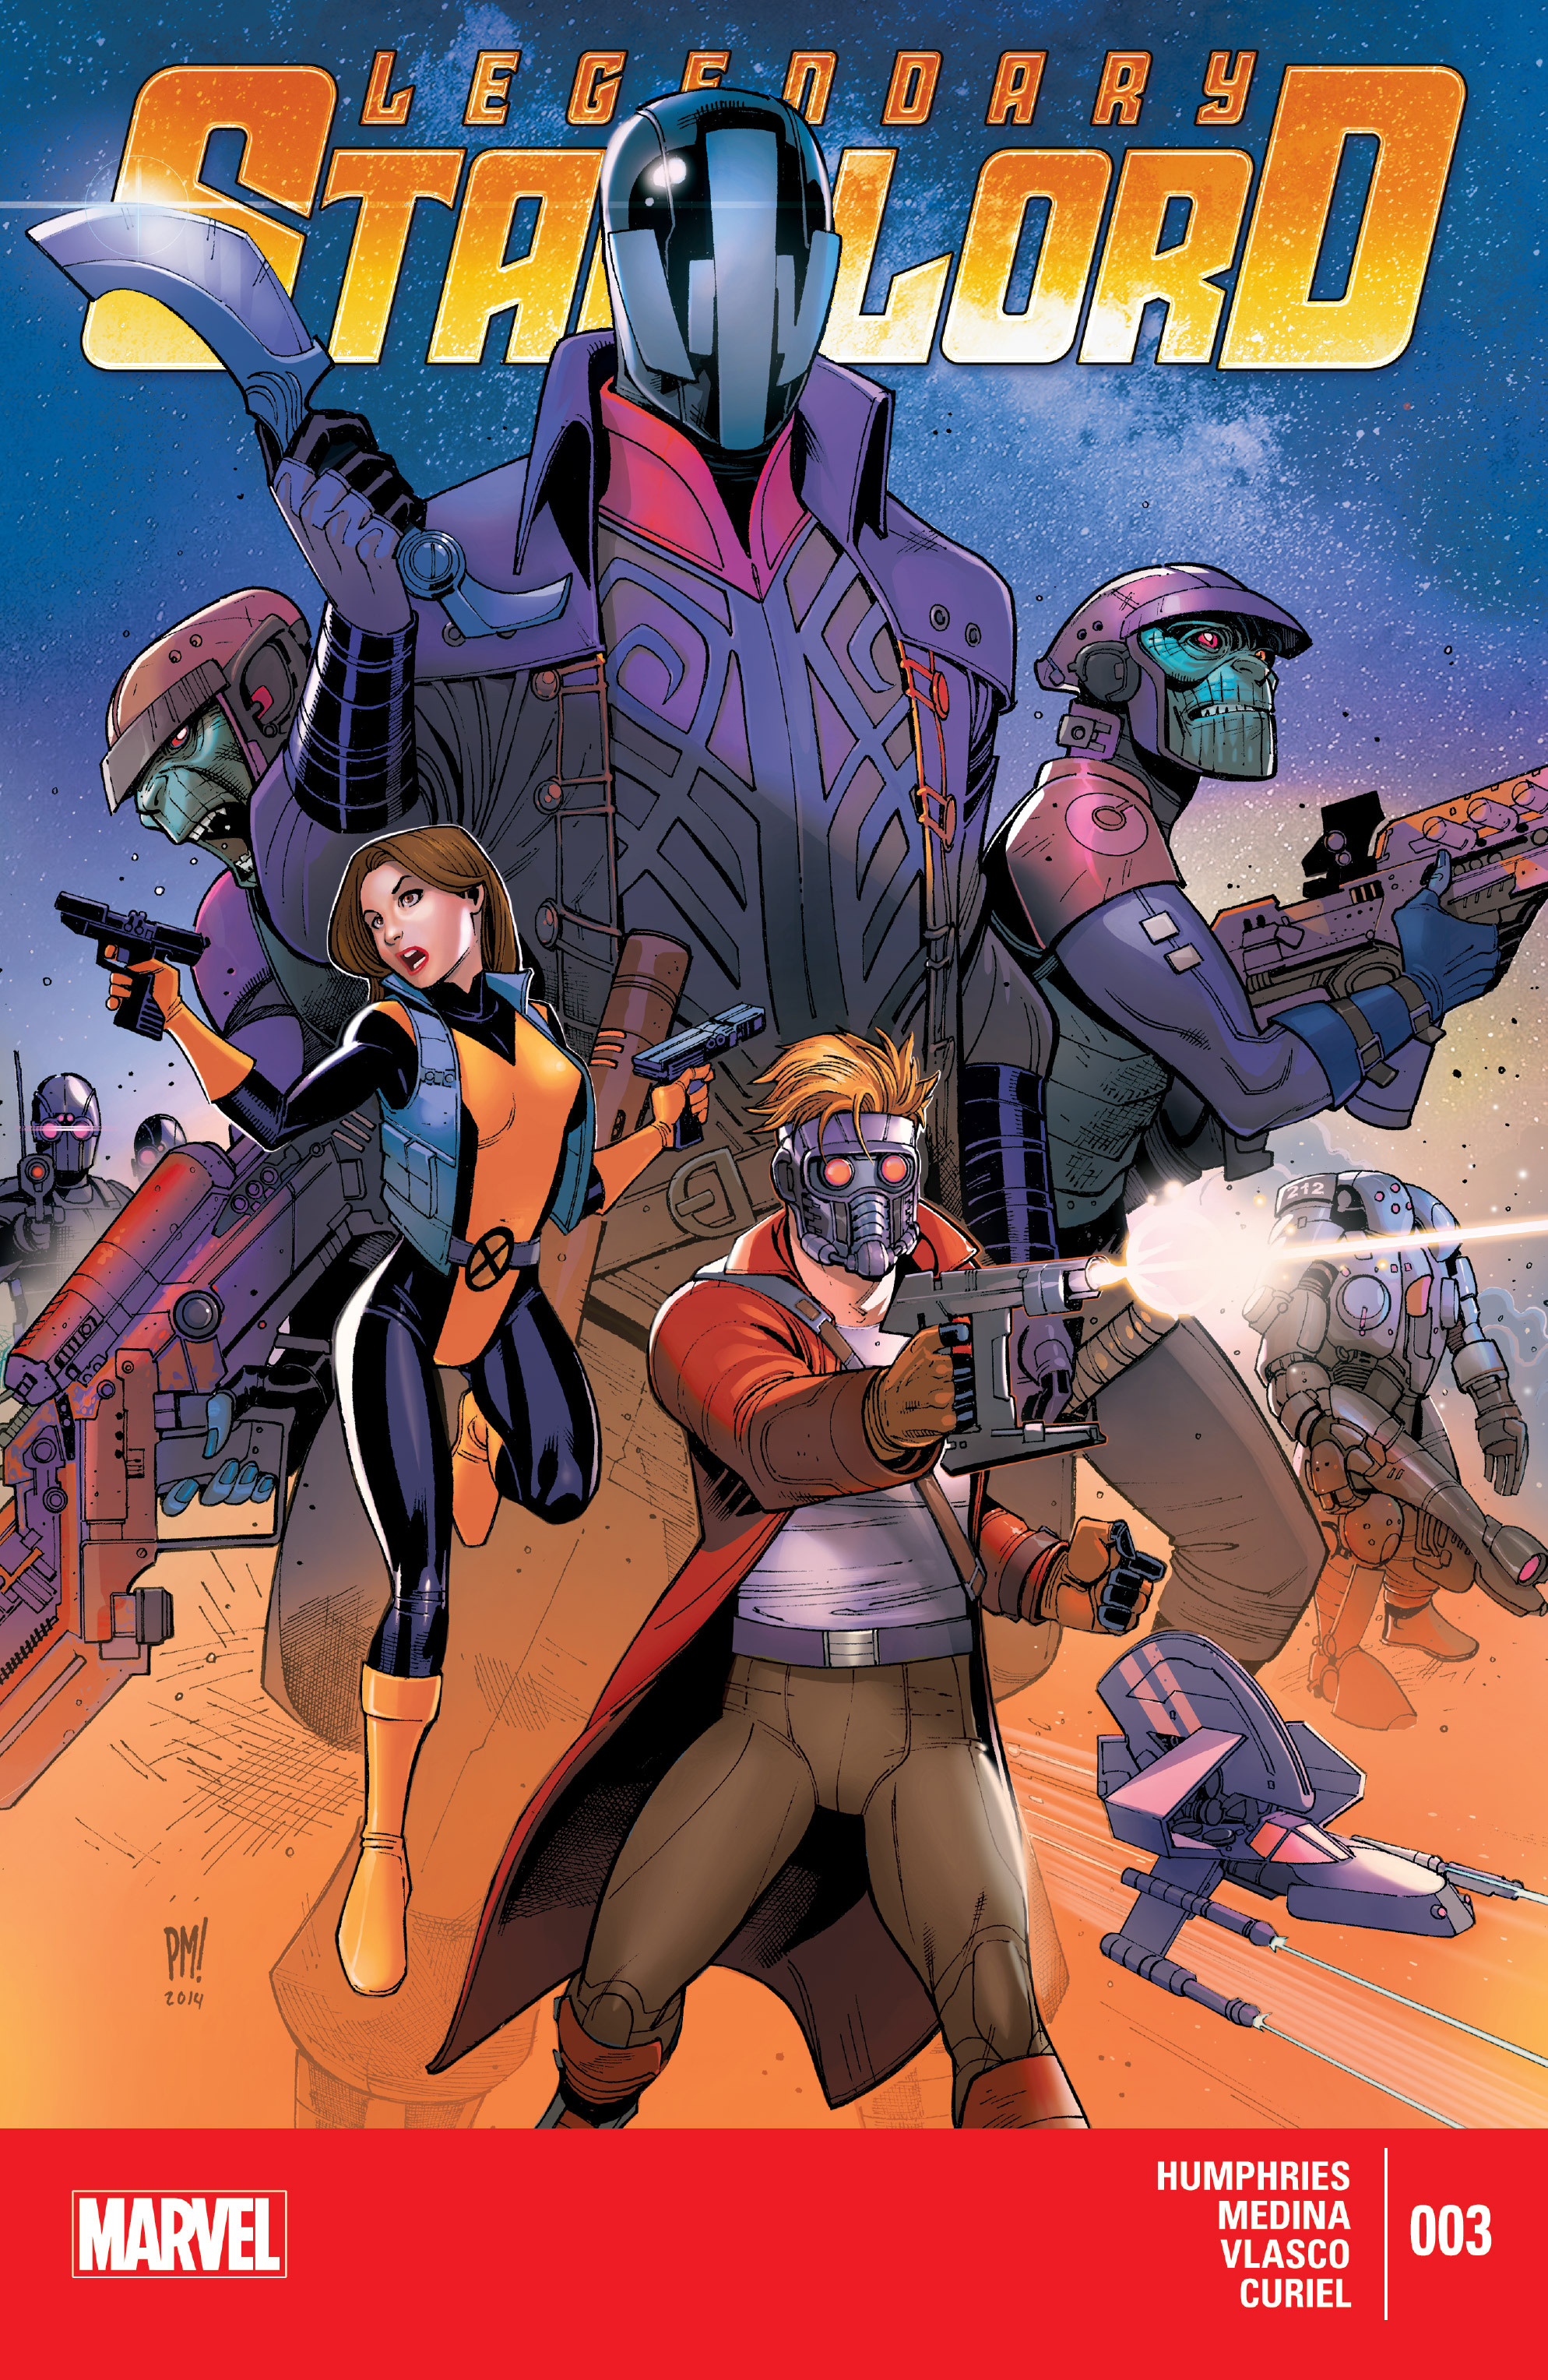 Read online Legendary Star-Lord comic -  Issue #3 - 1